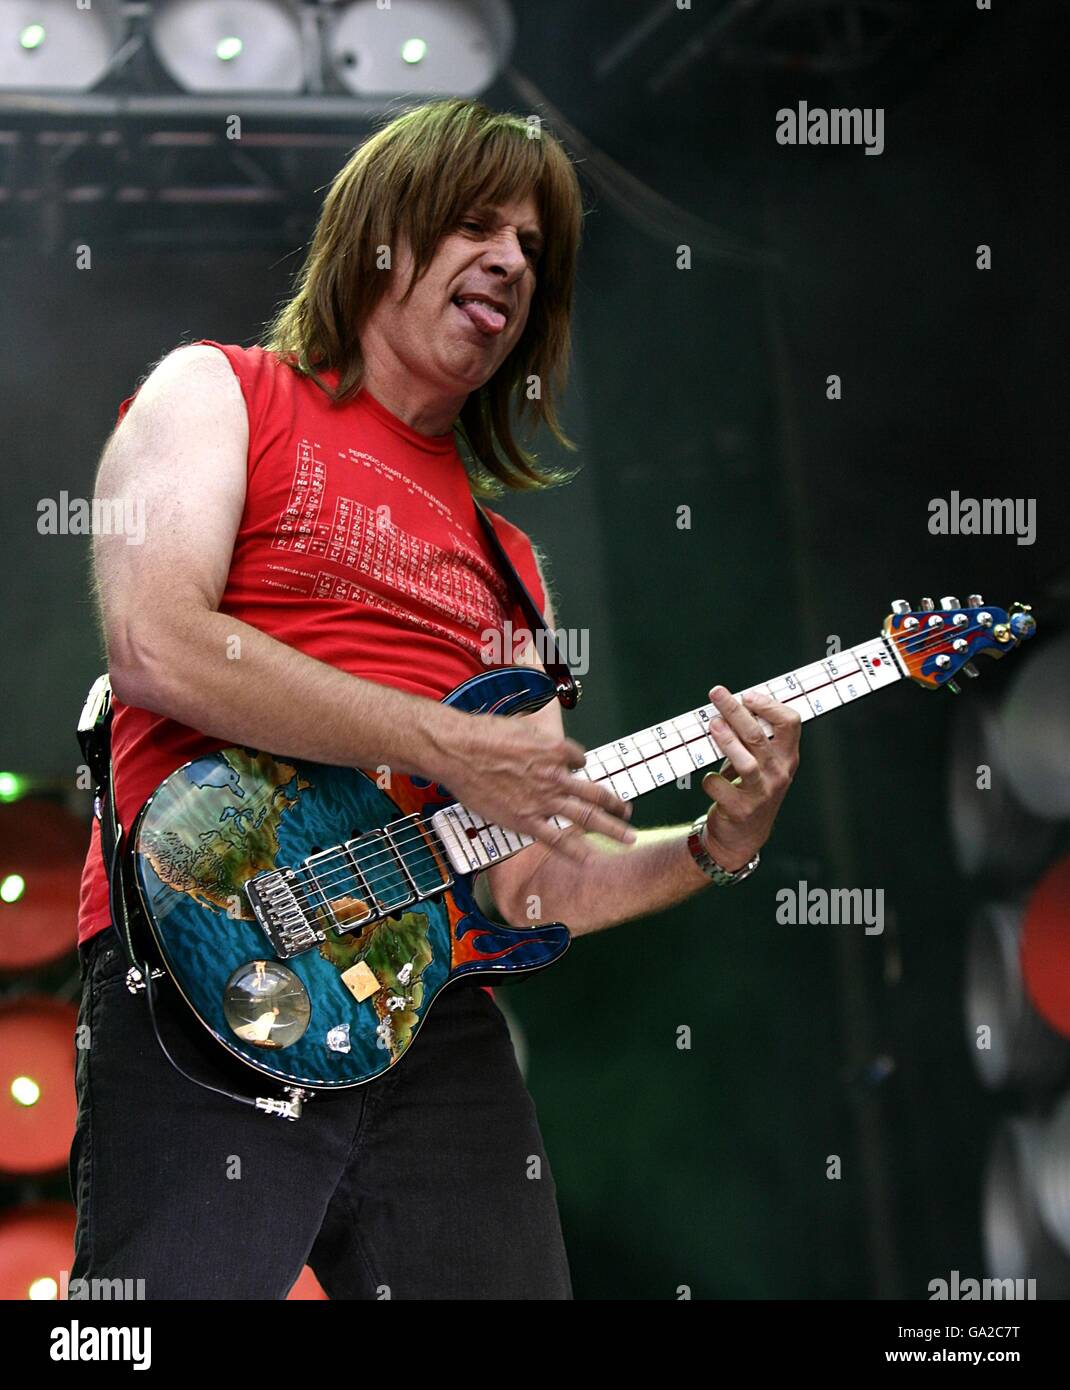 Christopher Guest member of the fictional band Spinal Tap perform during the charity concert at Wembley Stadium, London. Stock Photo